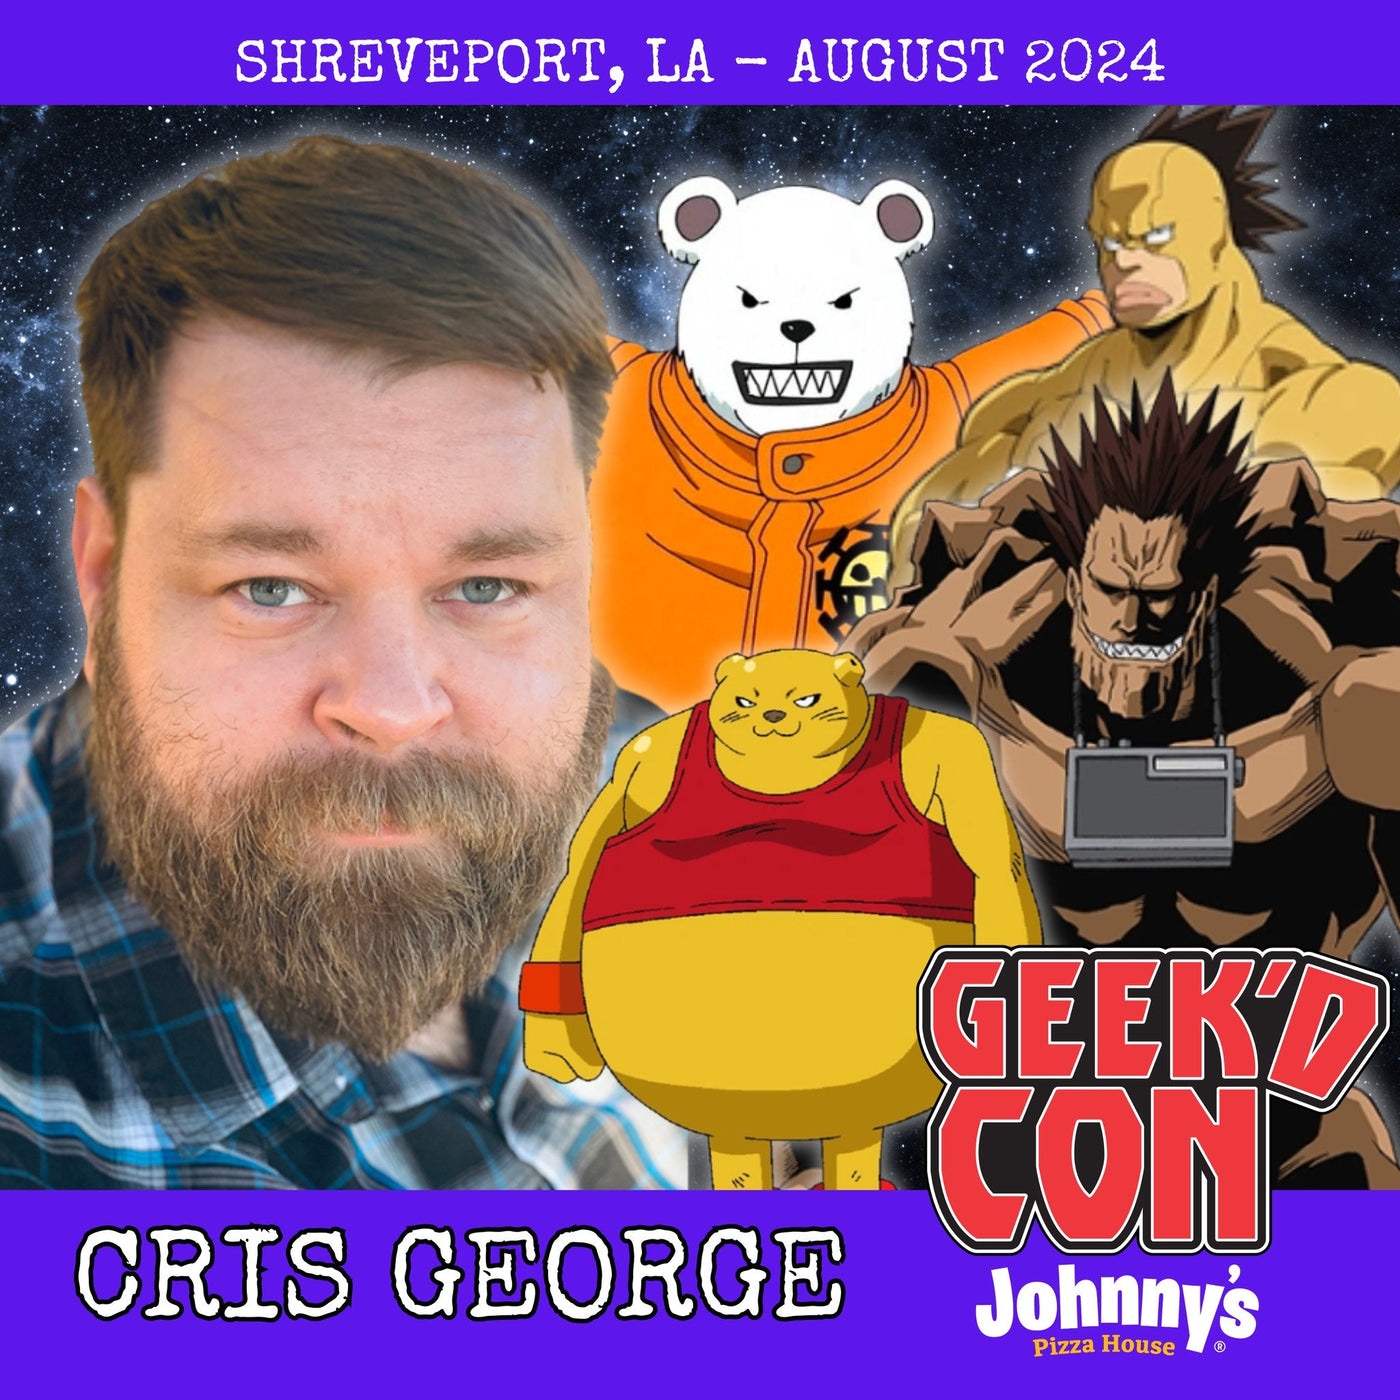 Cris George Official Autograph Mail-In Service - Geek'd Con 2024